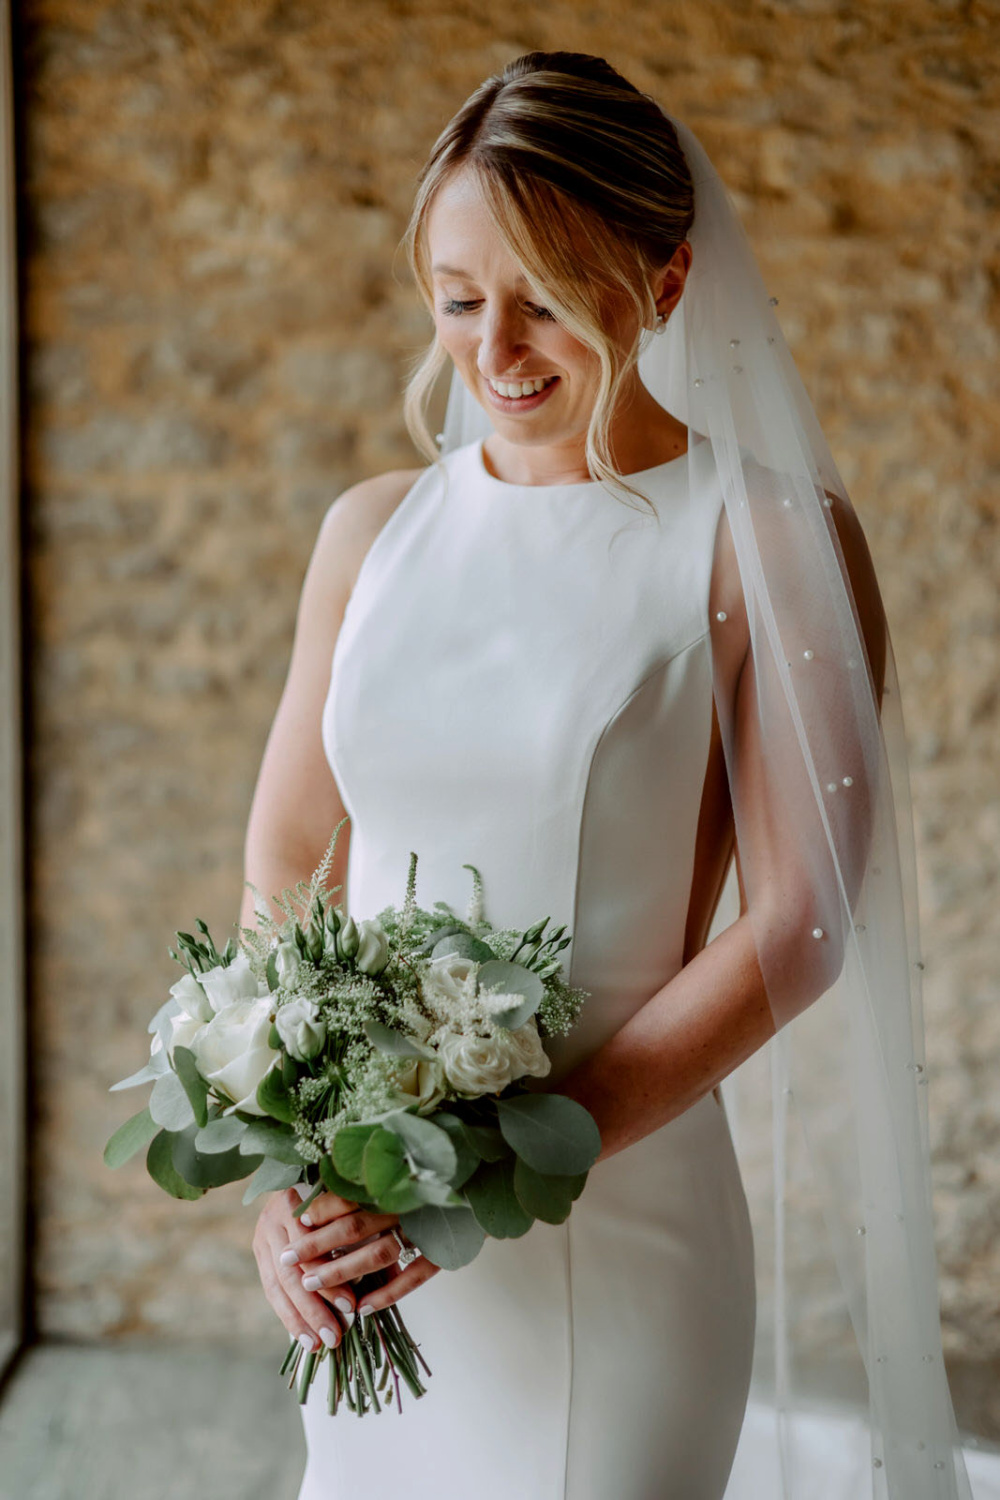 A bride in a white wedding dress holding a bouquet at Stratton Court Barn.